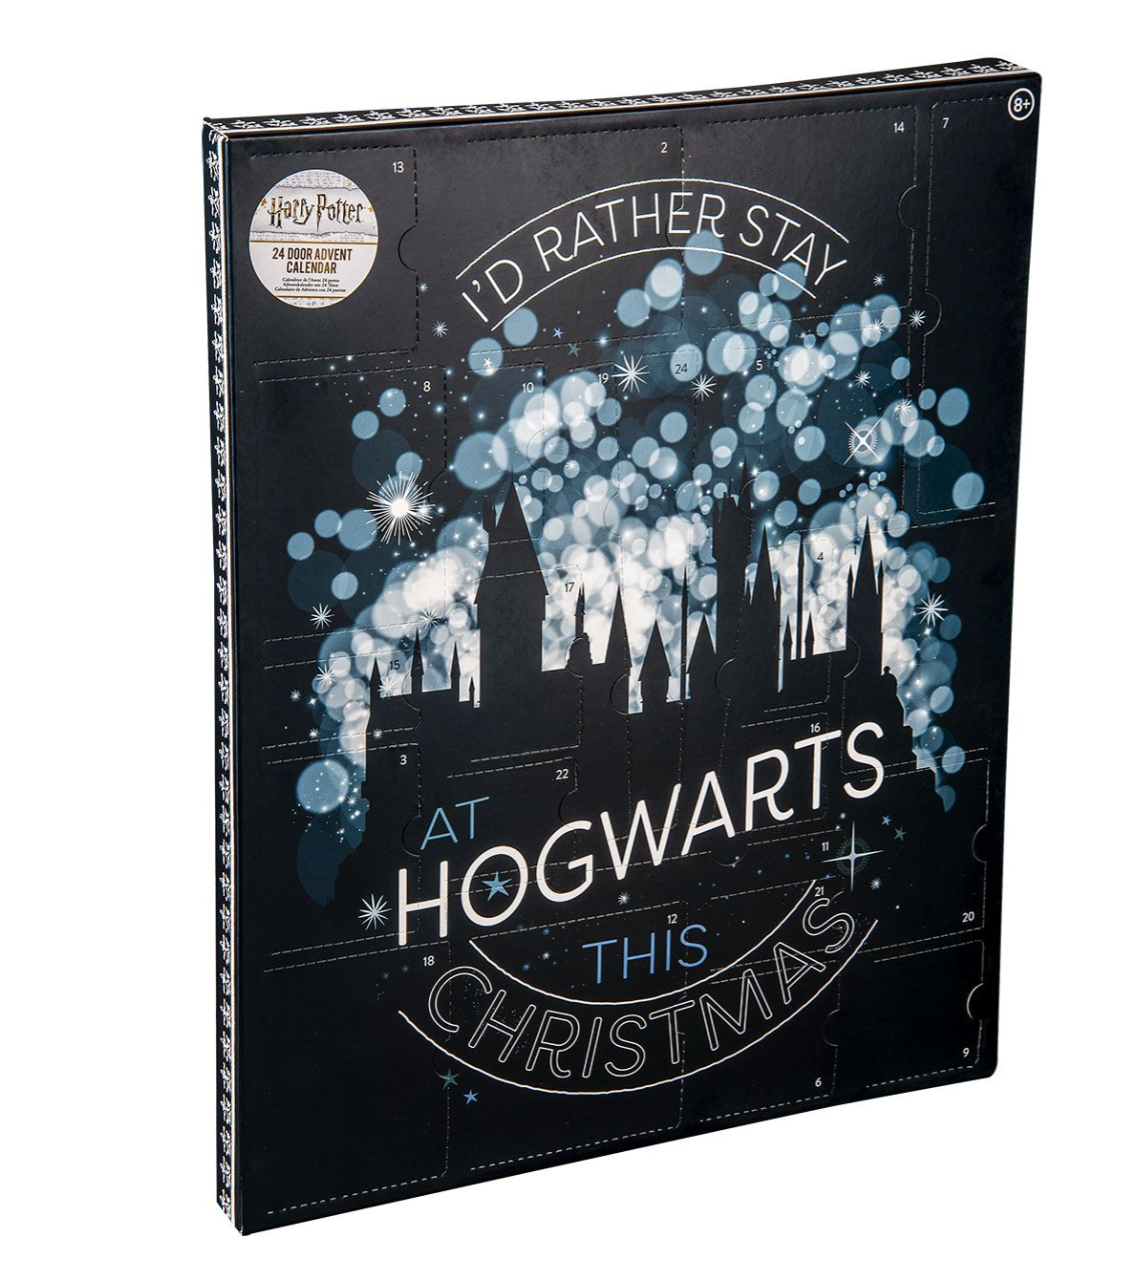 Harry Potter: I’d Rather Stay At Hogwarts This Christmas Advent Calendar – Available Now!